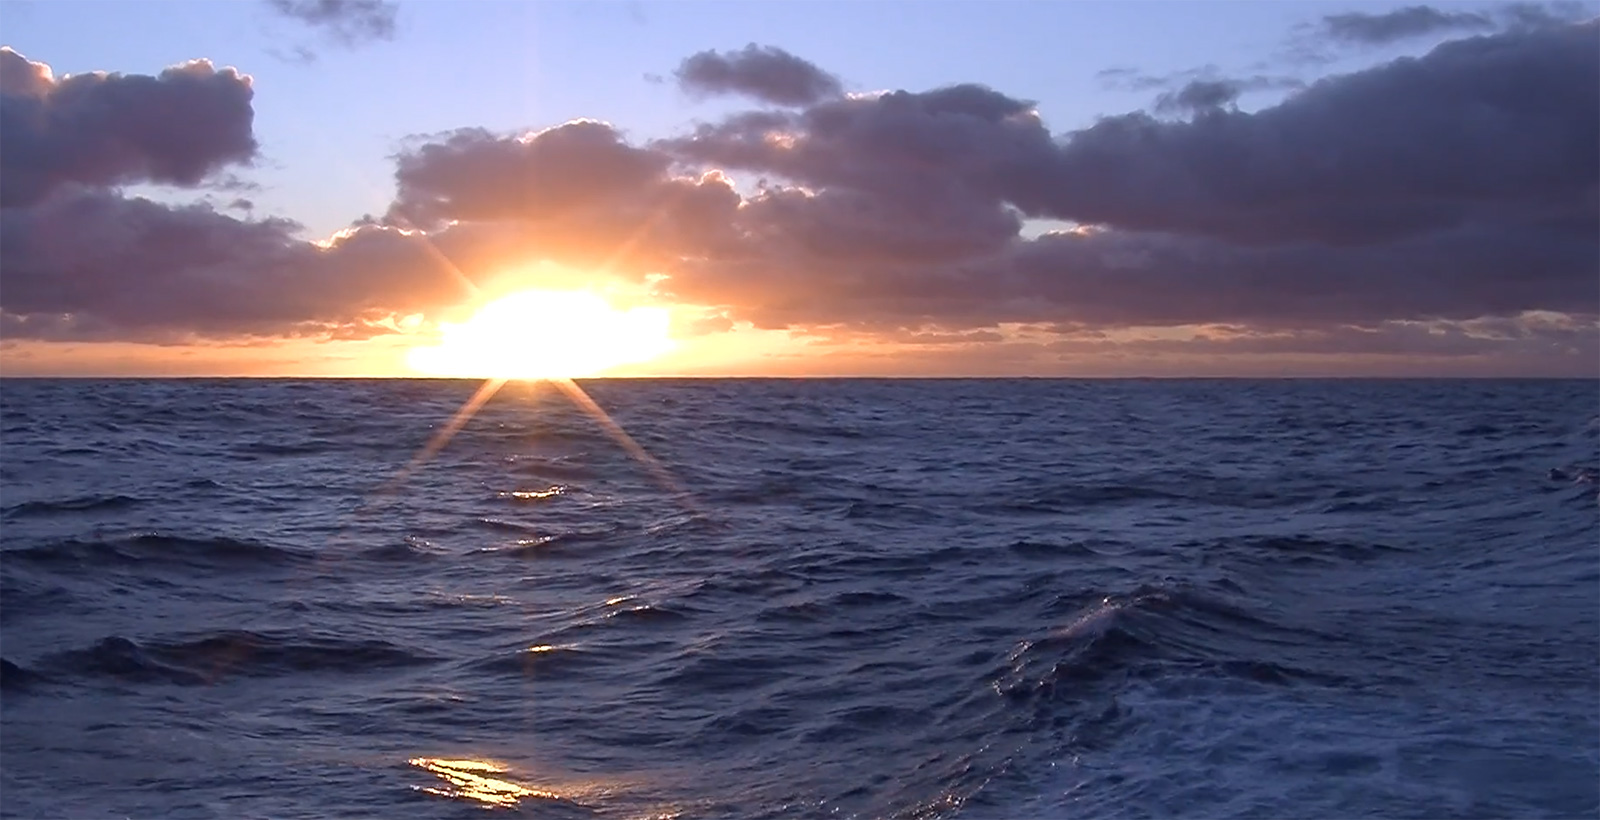 Sunset over the ocean. Video still by Nick Roden.